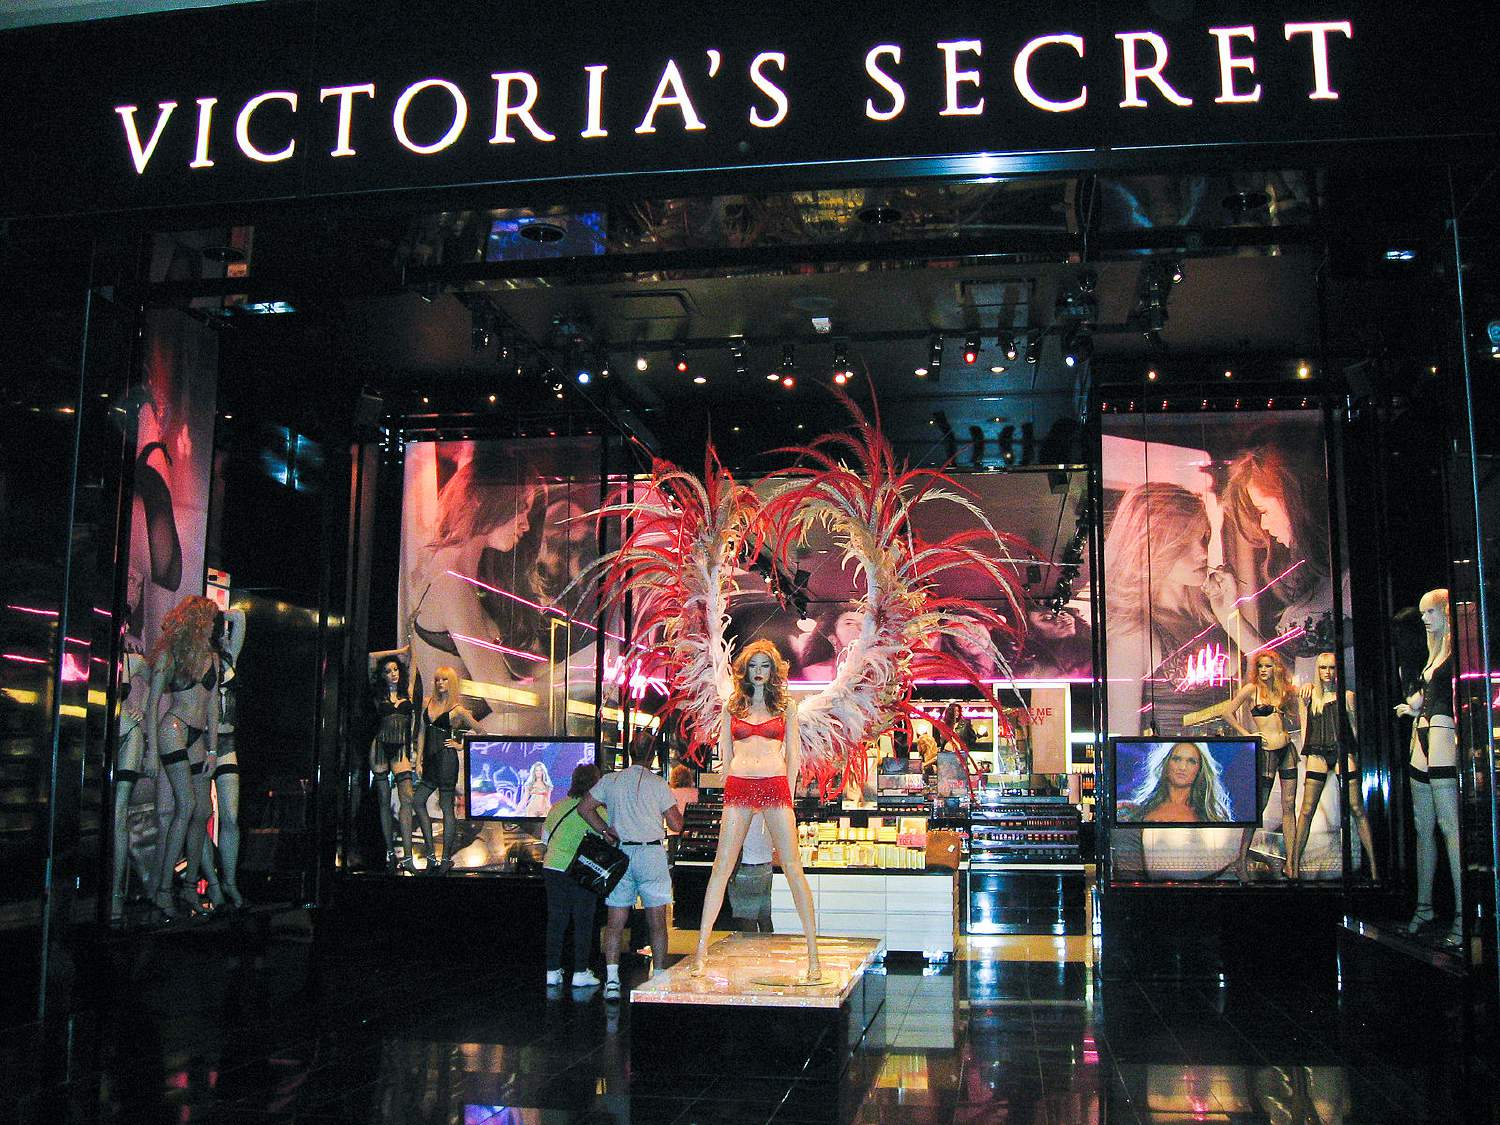 Time's up for the Victoria’s Secret fashion show